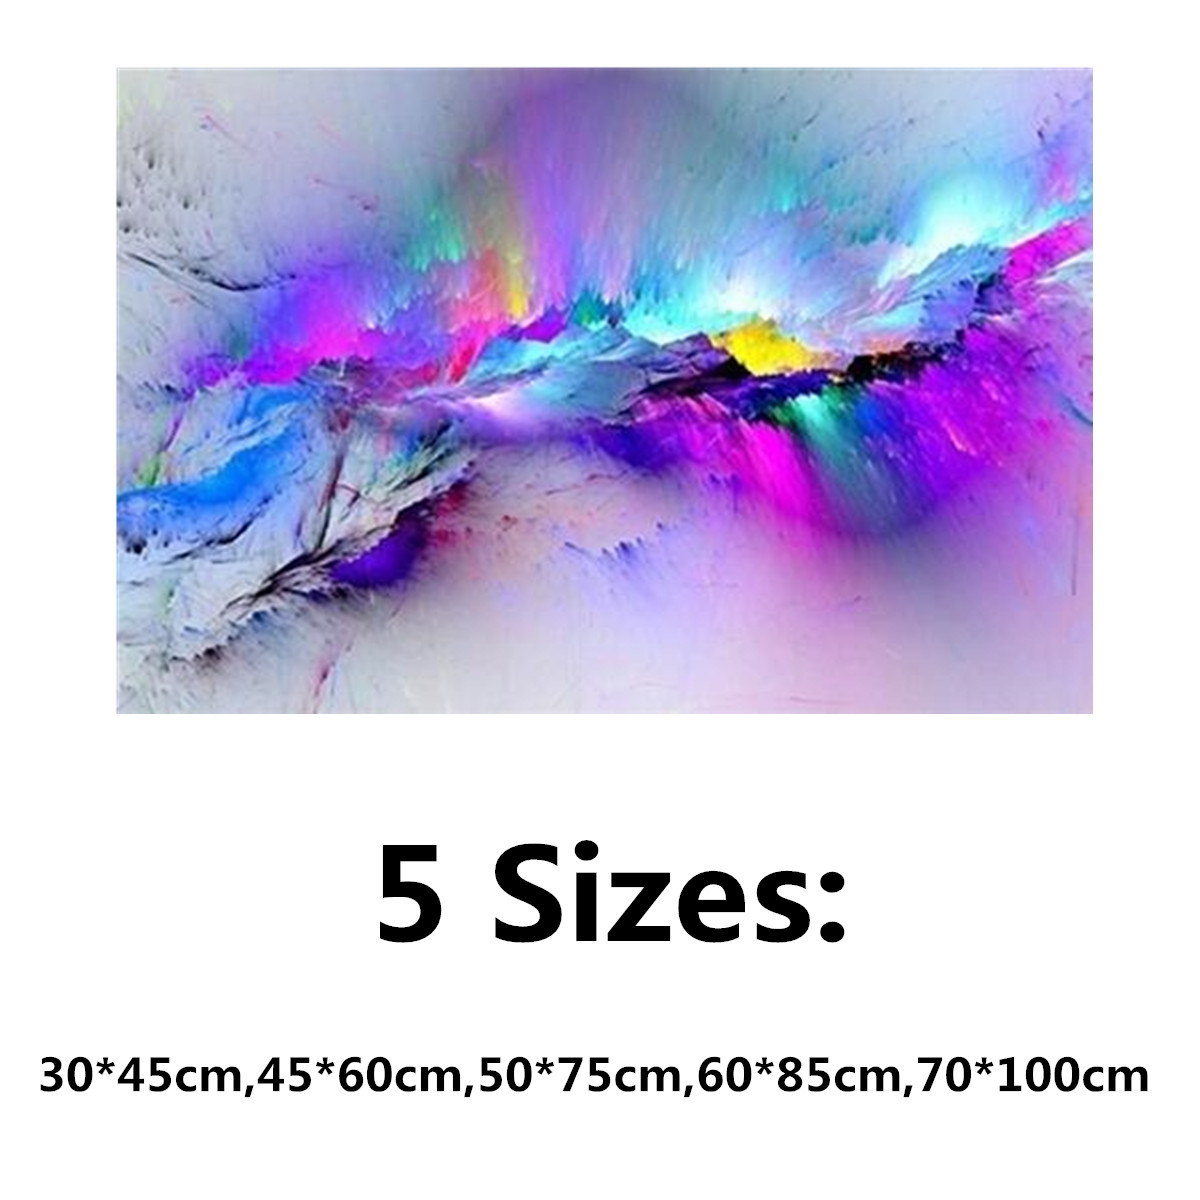 Abstract beautiful Cloud Painting Canvas Print Home Decor Wall Art 900x600mm 